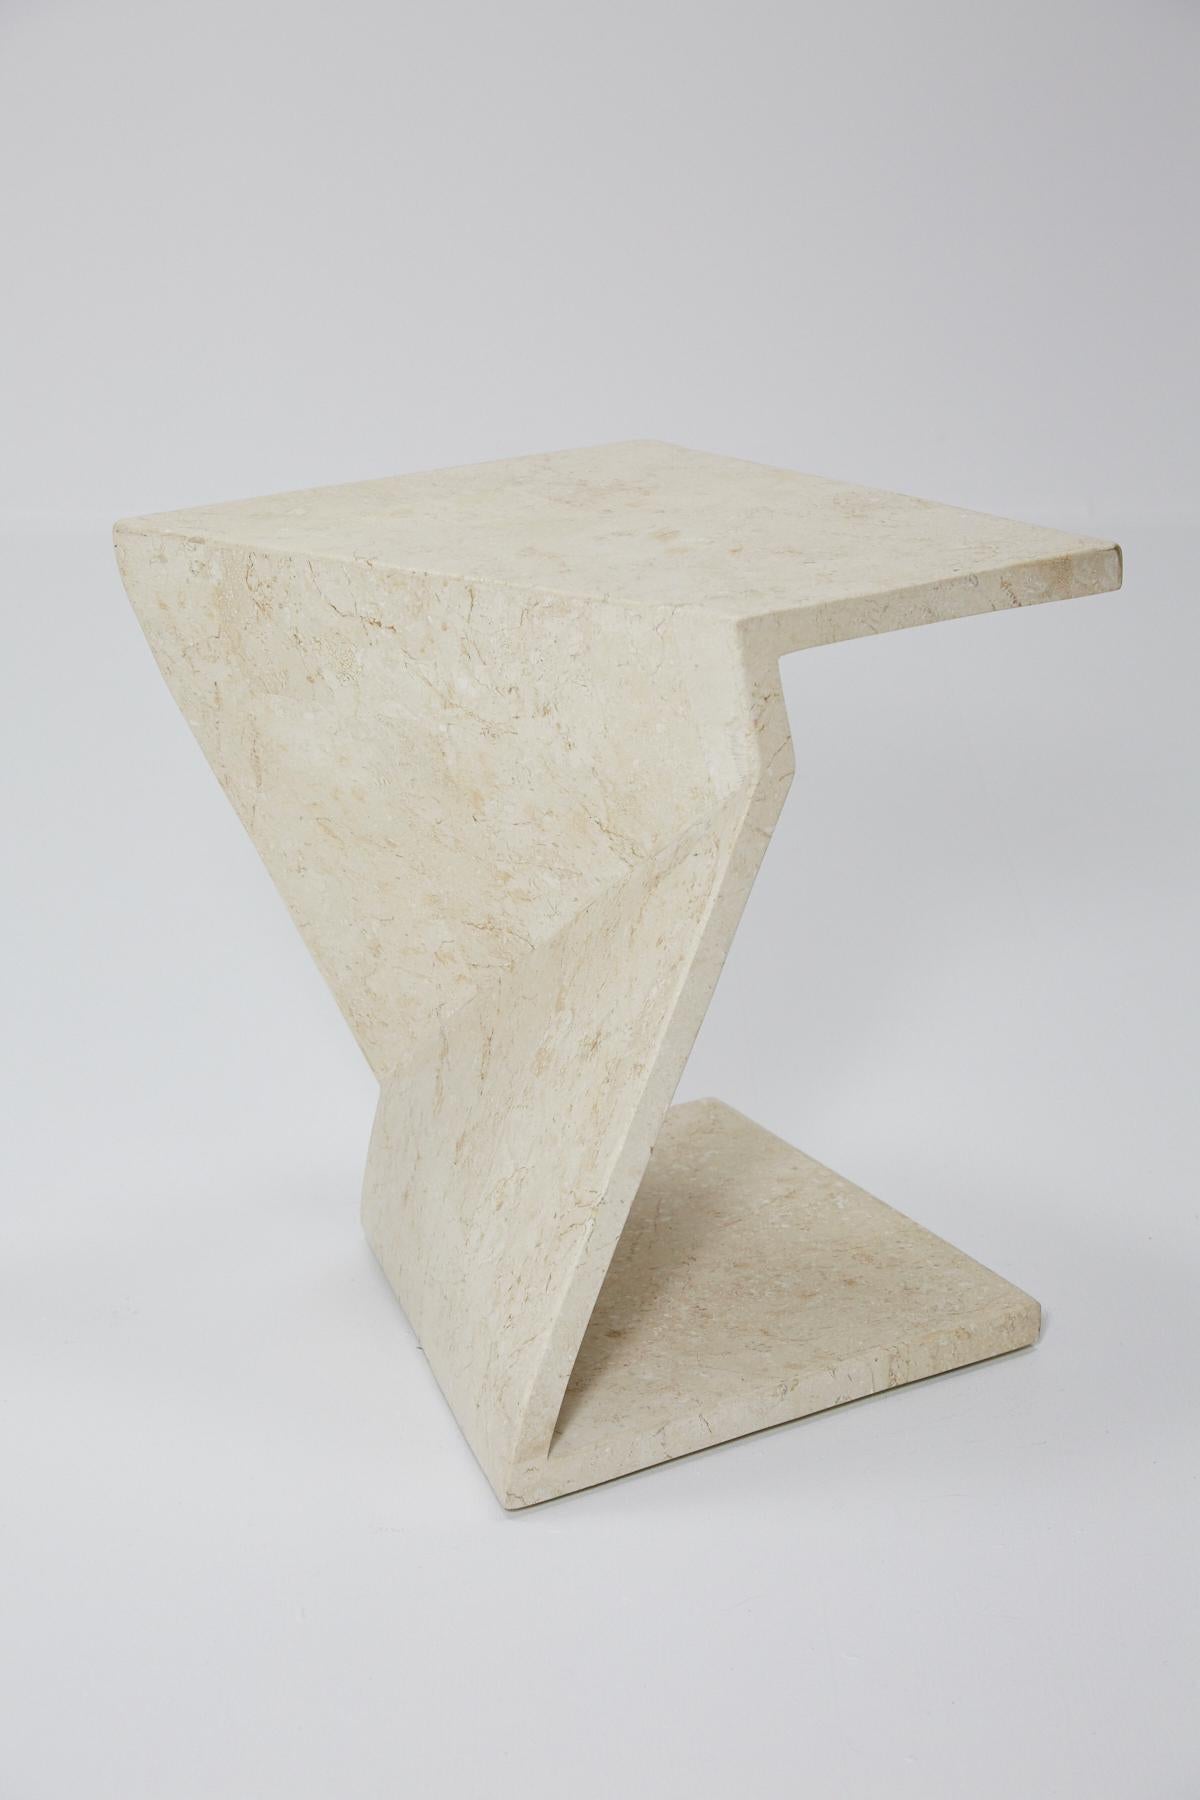 Zig Zag Side Tables or Coffee Table in Tessellated White Stone, 1990s 2